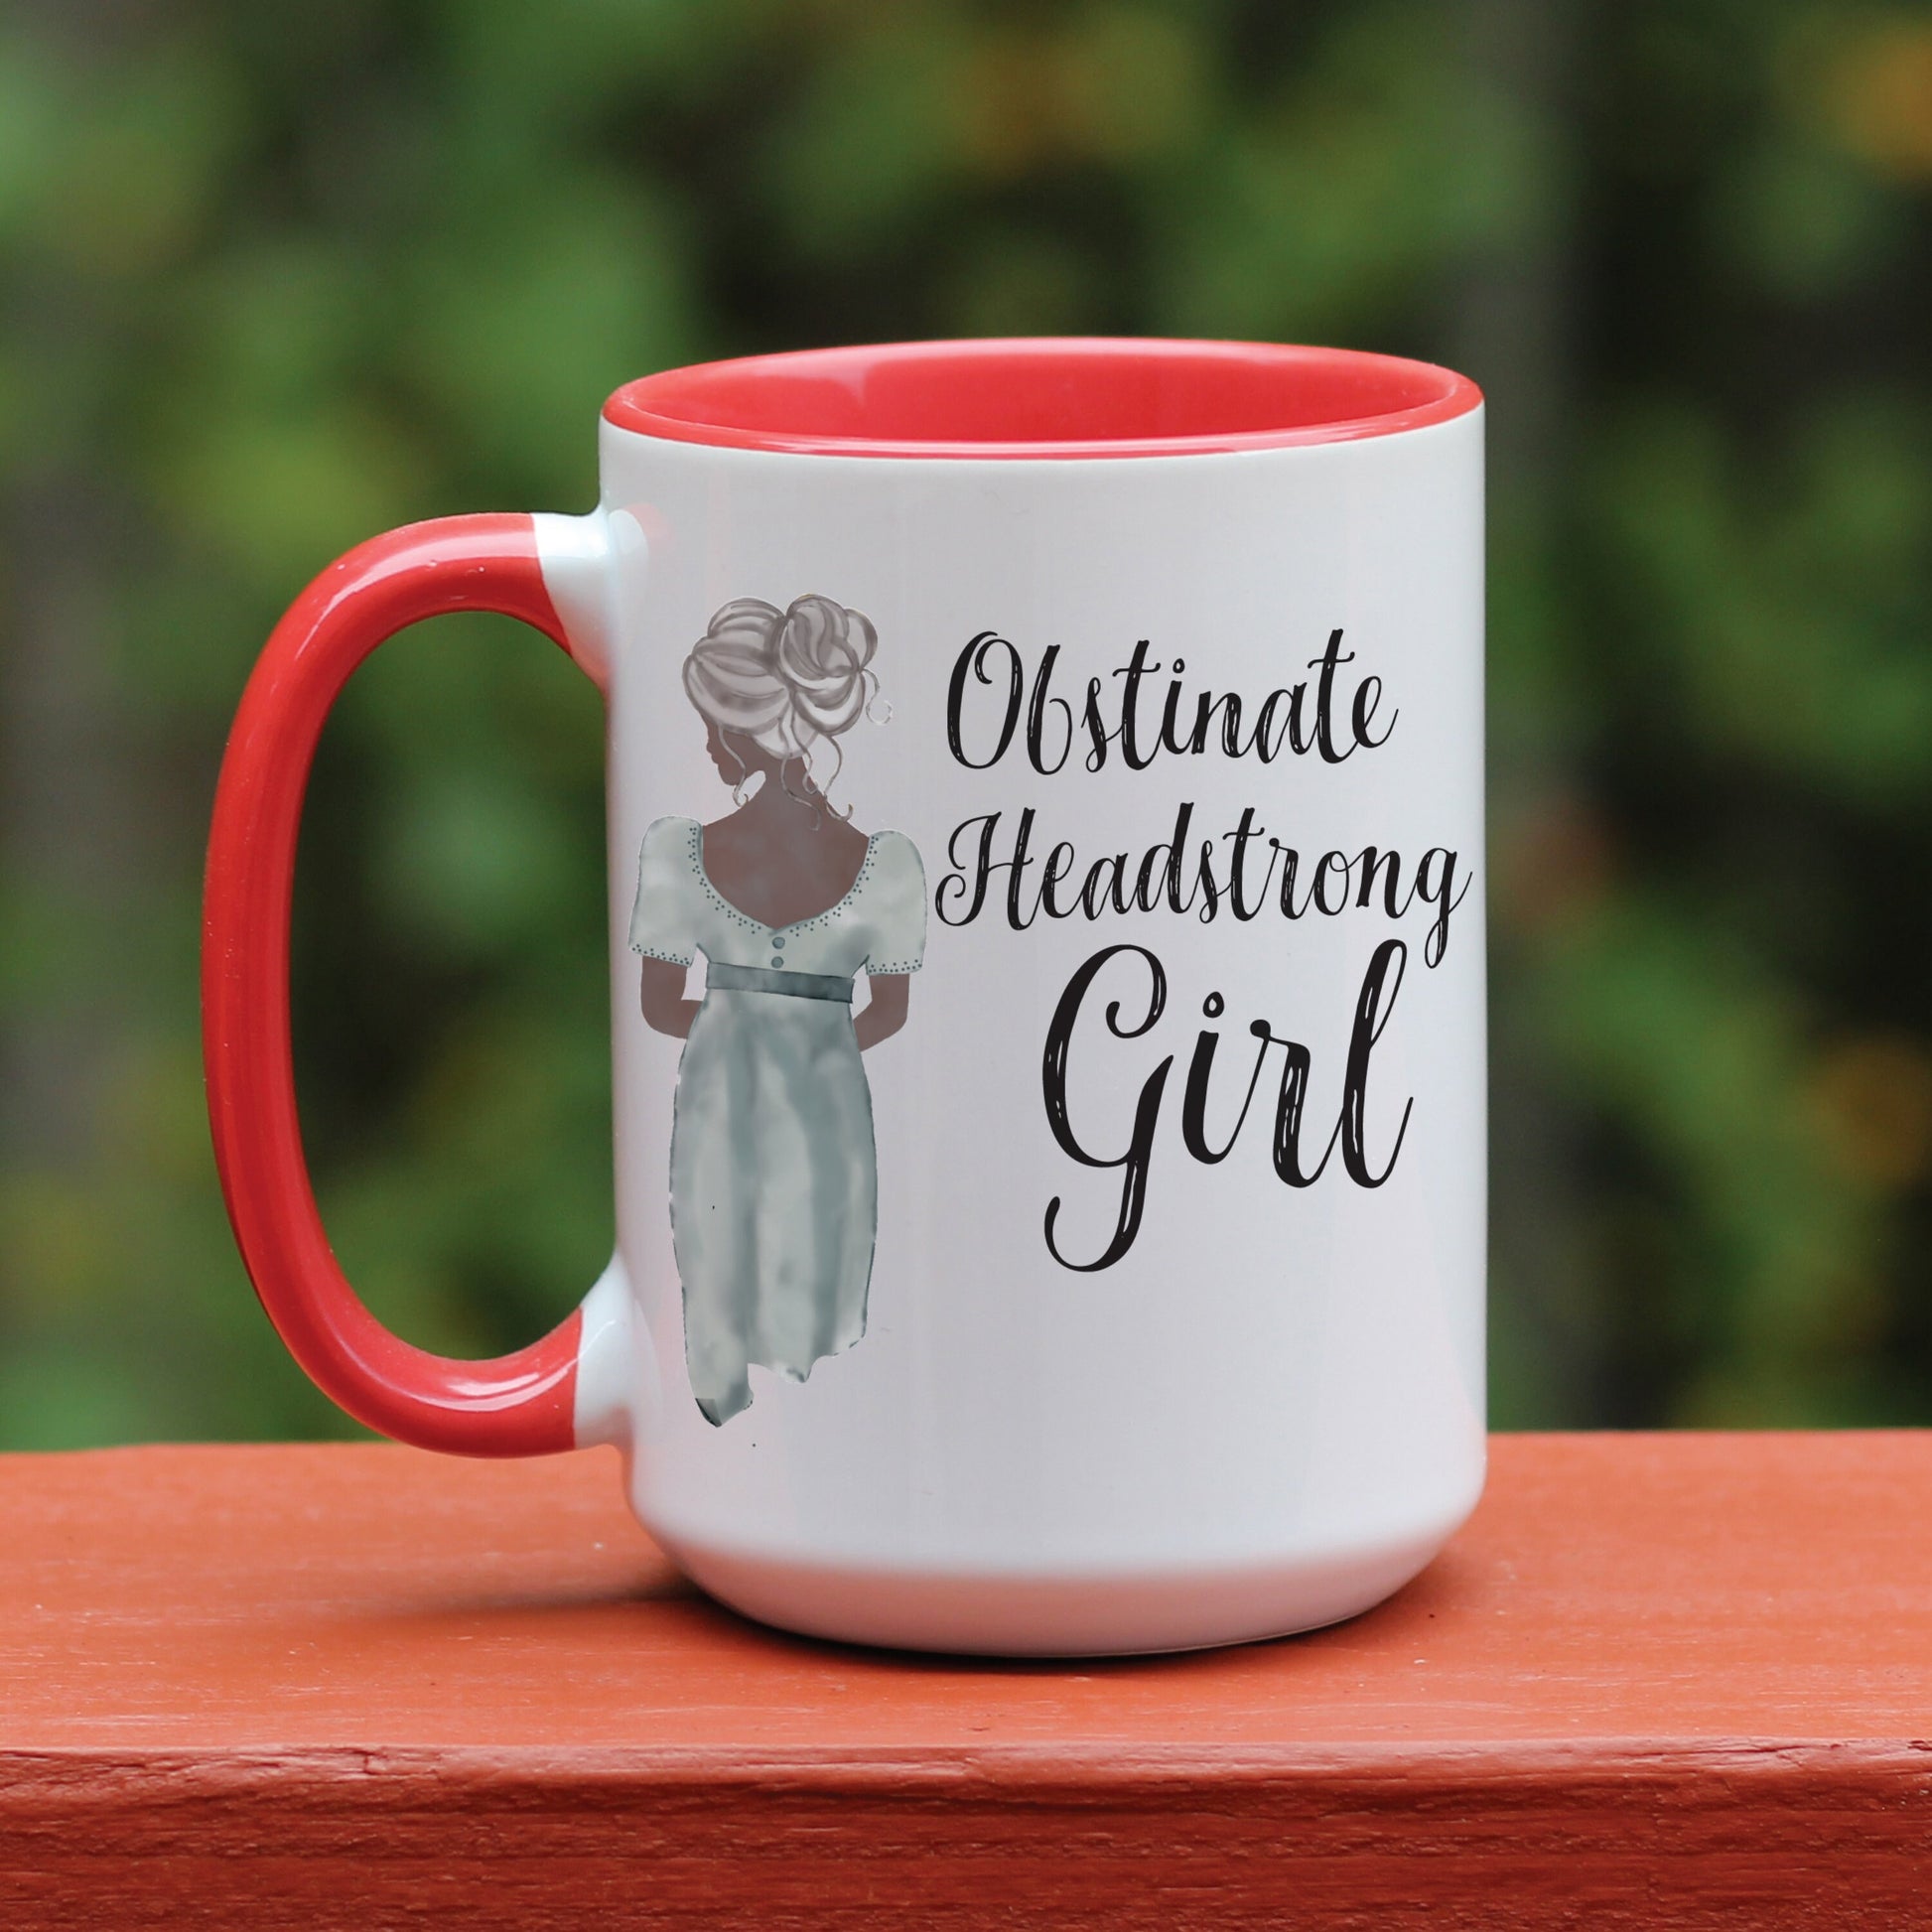 Jane Austen Pride and Prejudice Obstinate Headstrong Girl quote white coffee mug with red handle.